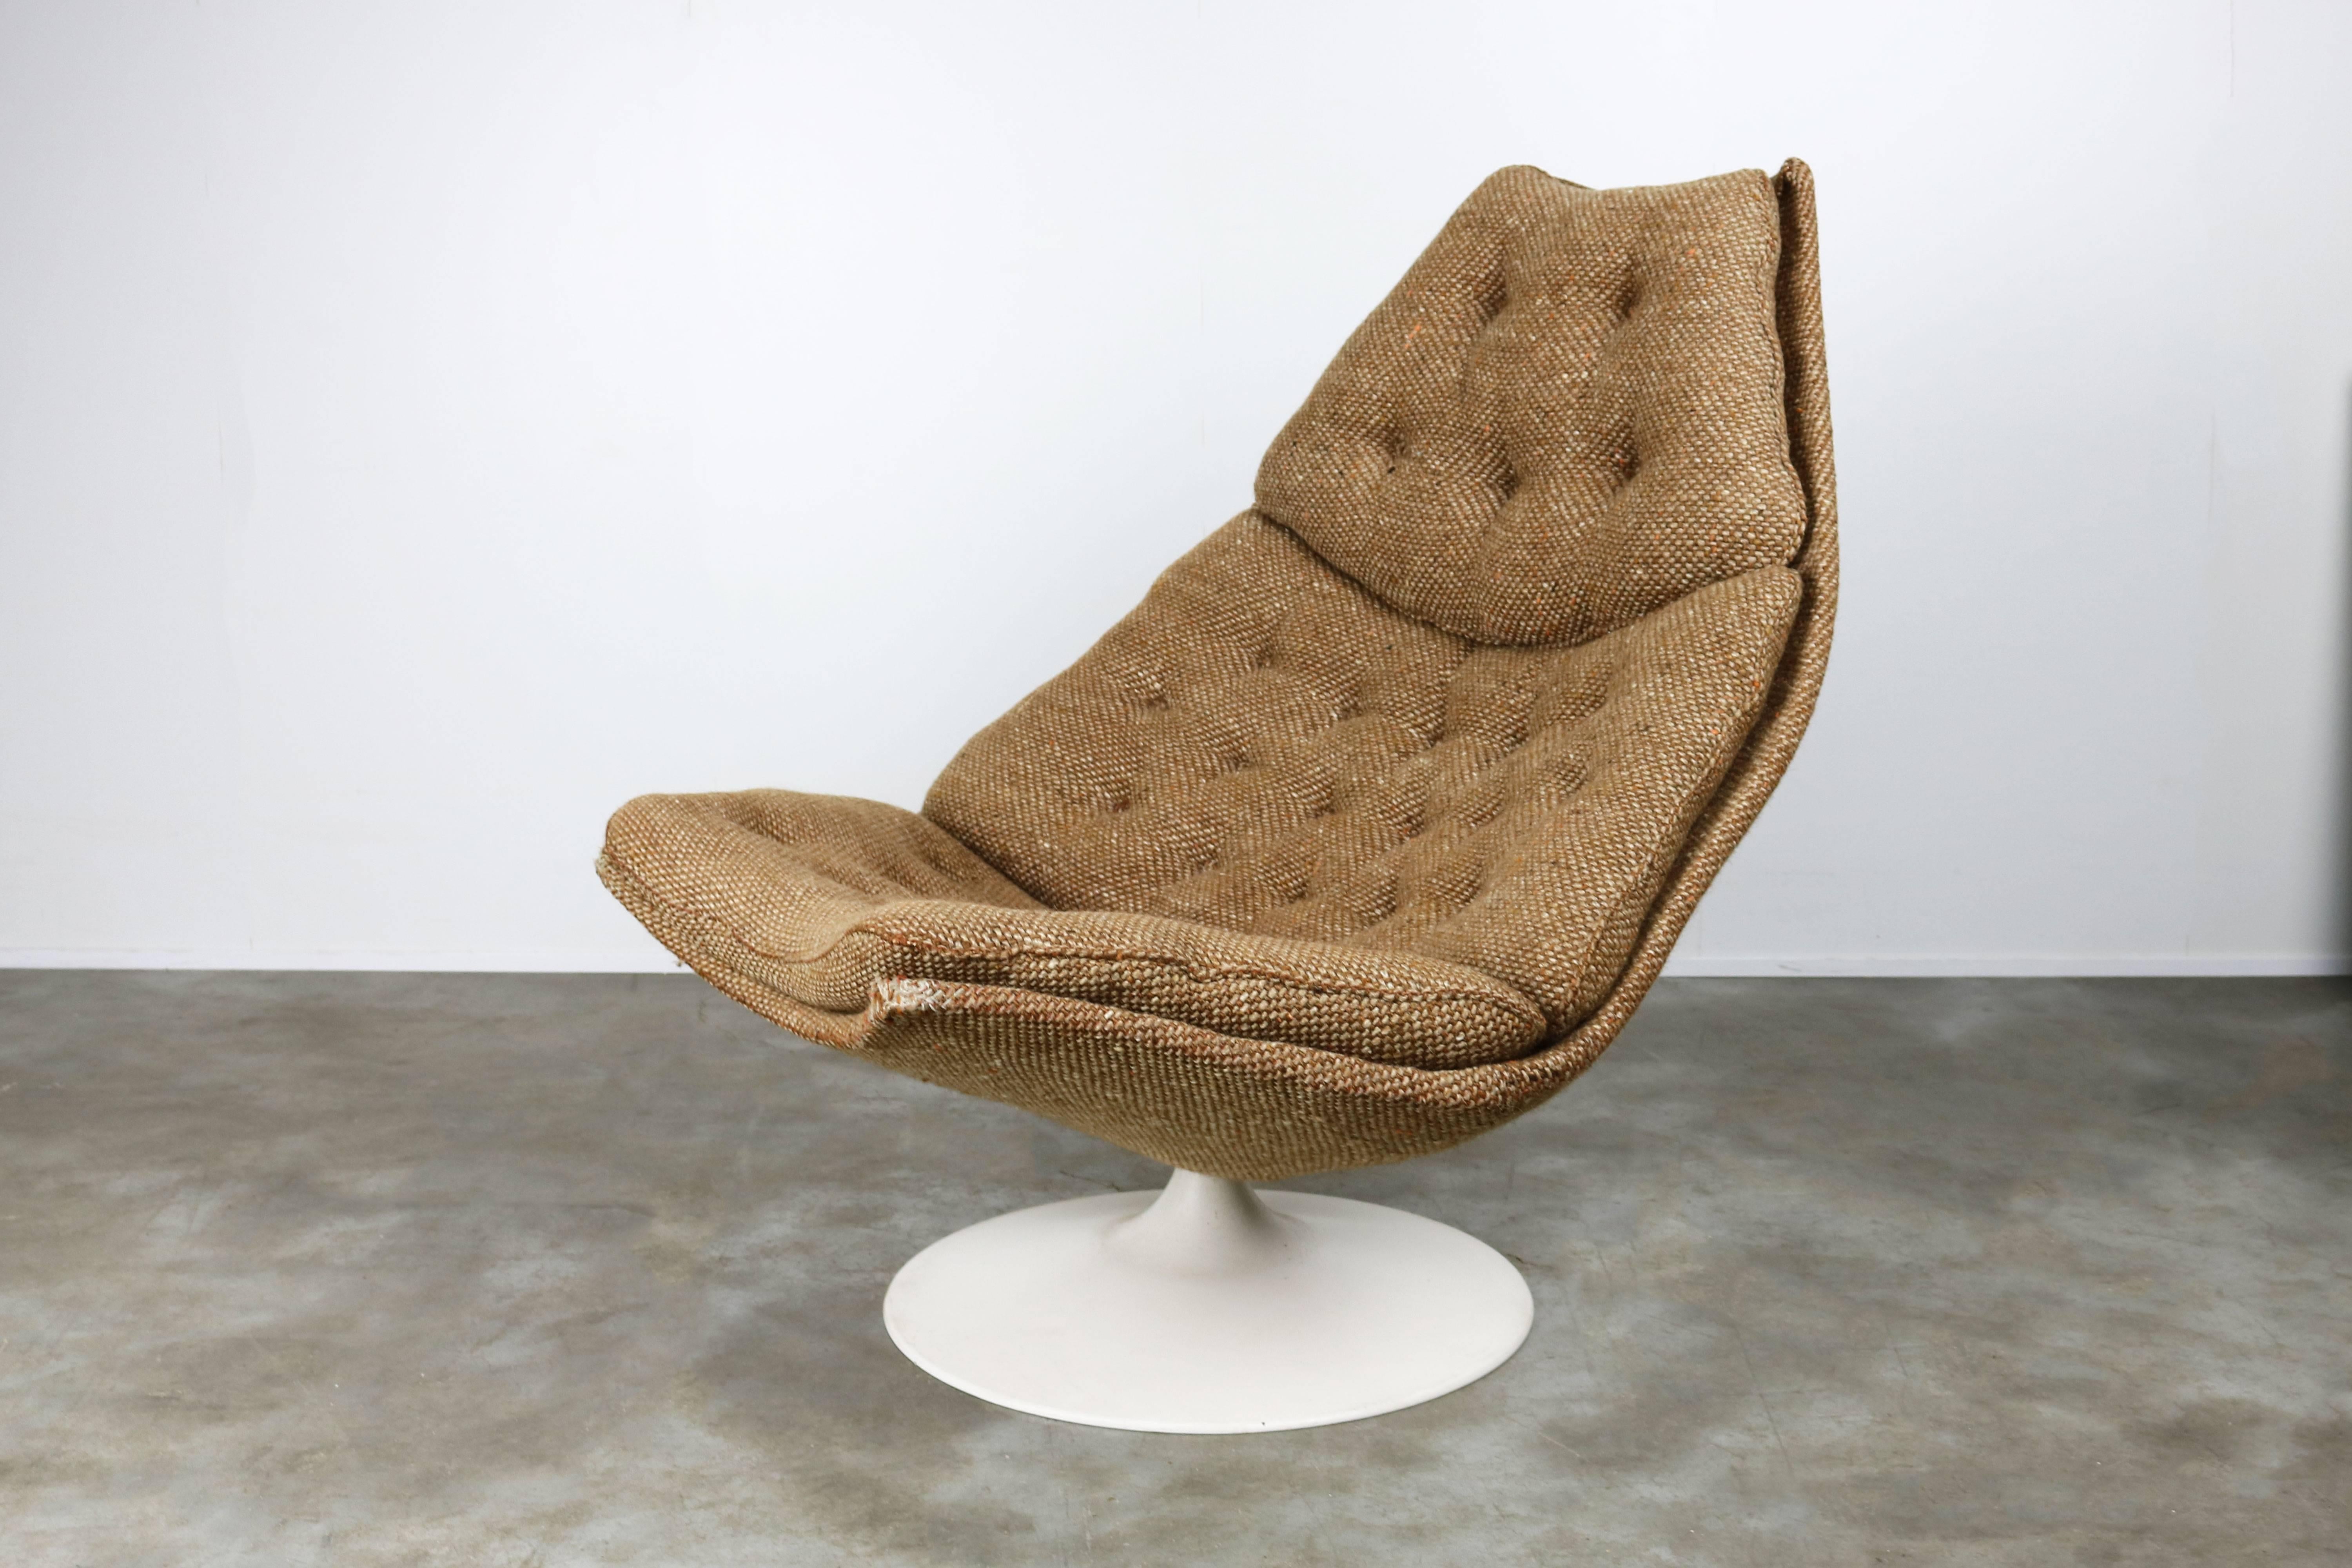 Large F588 swivel lounge chair by Geoffrey Harcourt for Artifort, 1960. With original woven wool fabric in brown / white and white base. Chair has original Artifort label.
The lounge chair has a Royal and warm feeling, very comfortable. Base shows